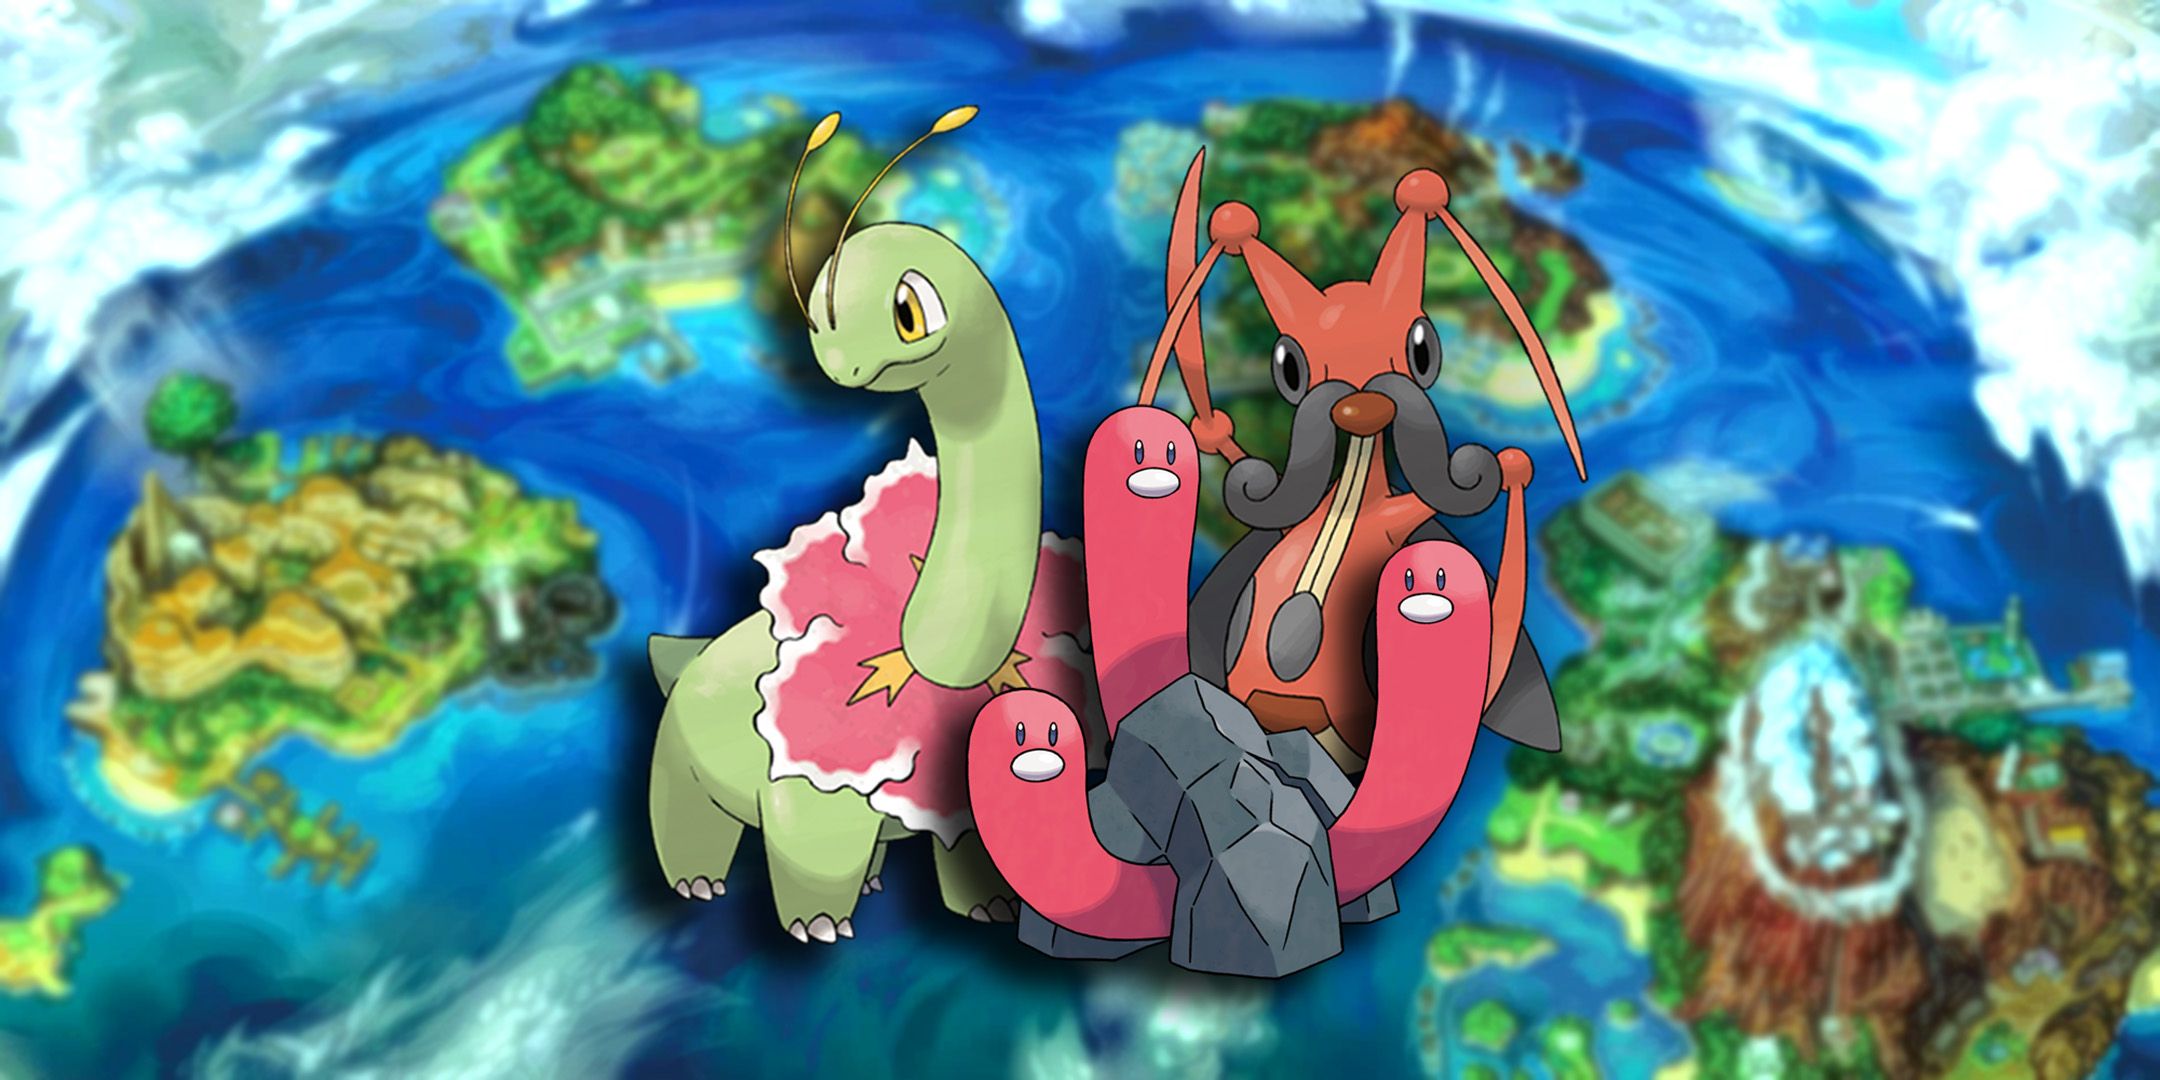 Meganium, Kricketune, and Wugtrio in front of Alola region map